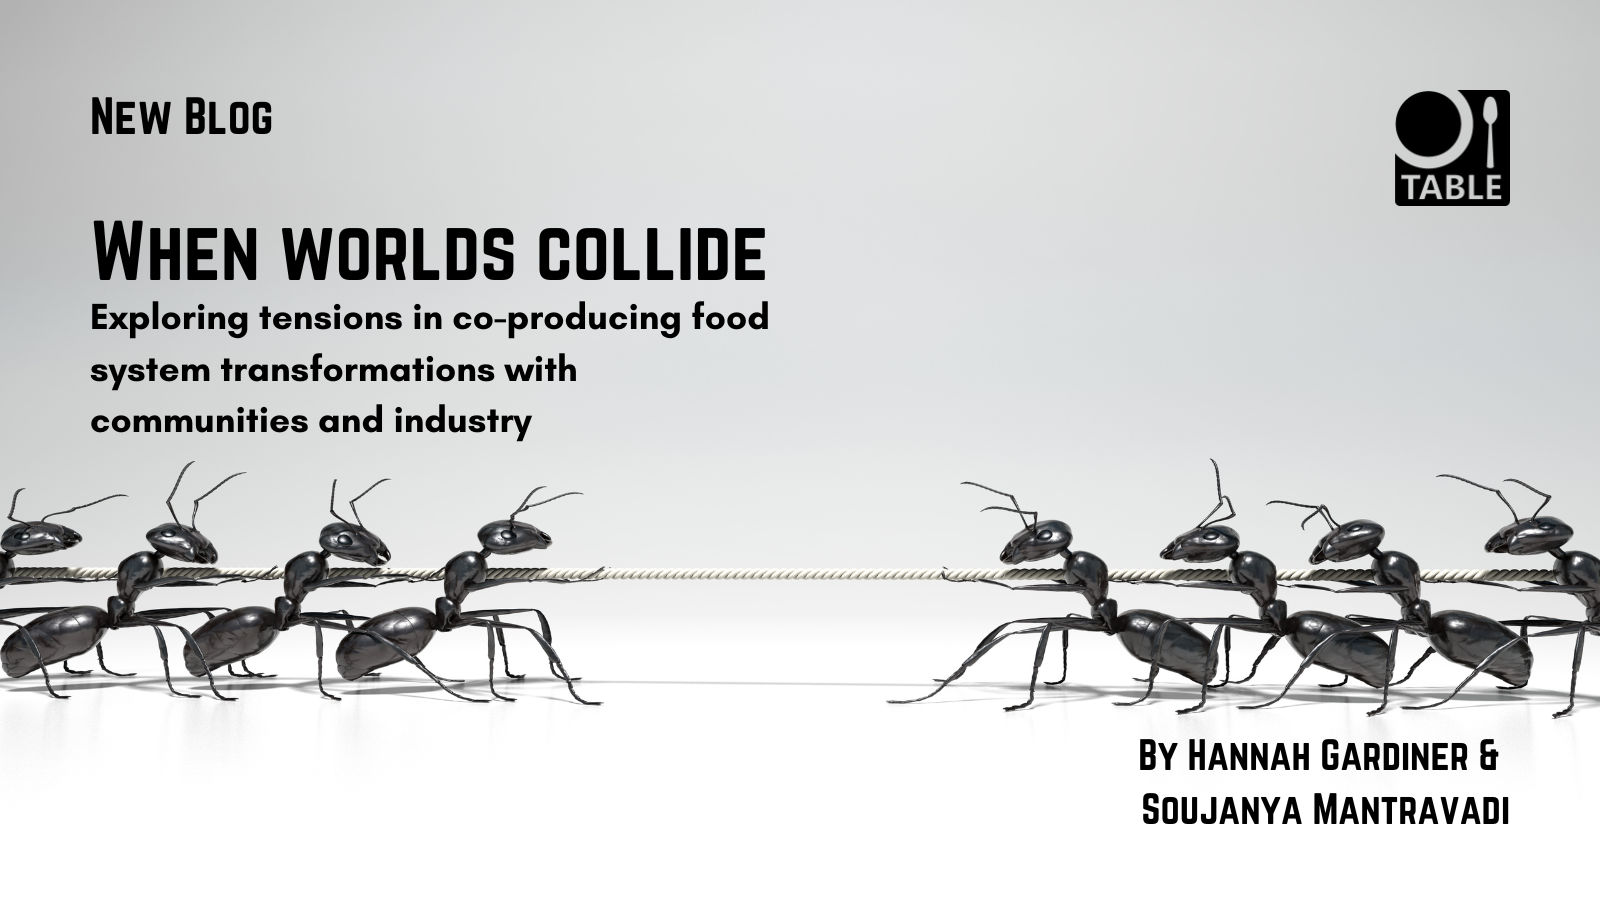 This flyer advertises a new blog by Hannah Gardiner and Soujanya Mantravadi called "When worlds collide: Exploring tensions in co-producing food system transformations with communities and industry" with an image of ants collaborating in tug of war.